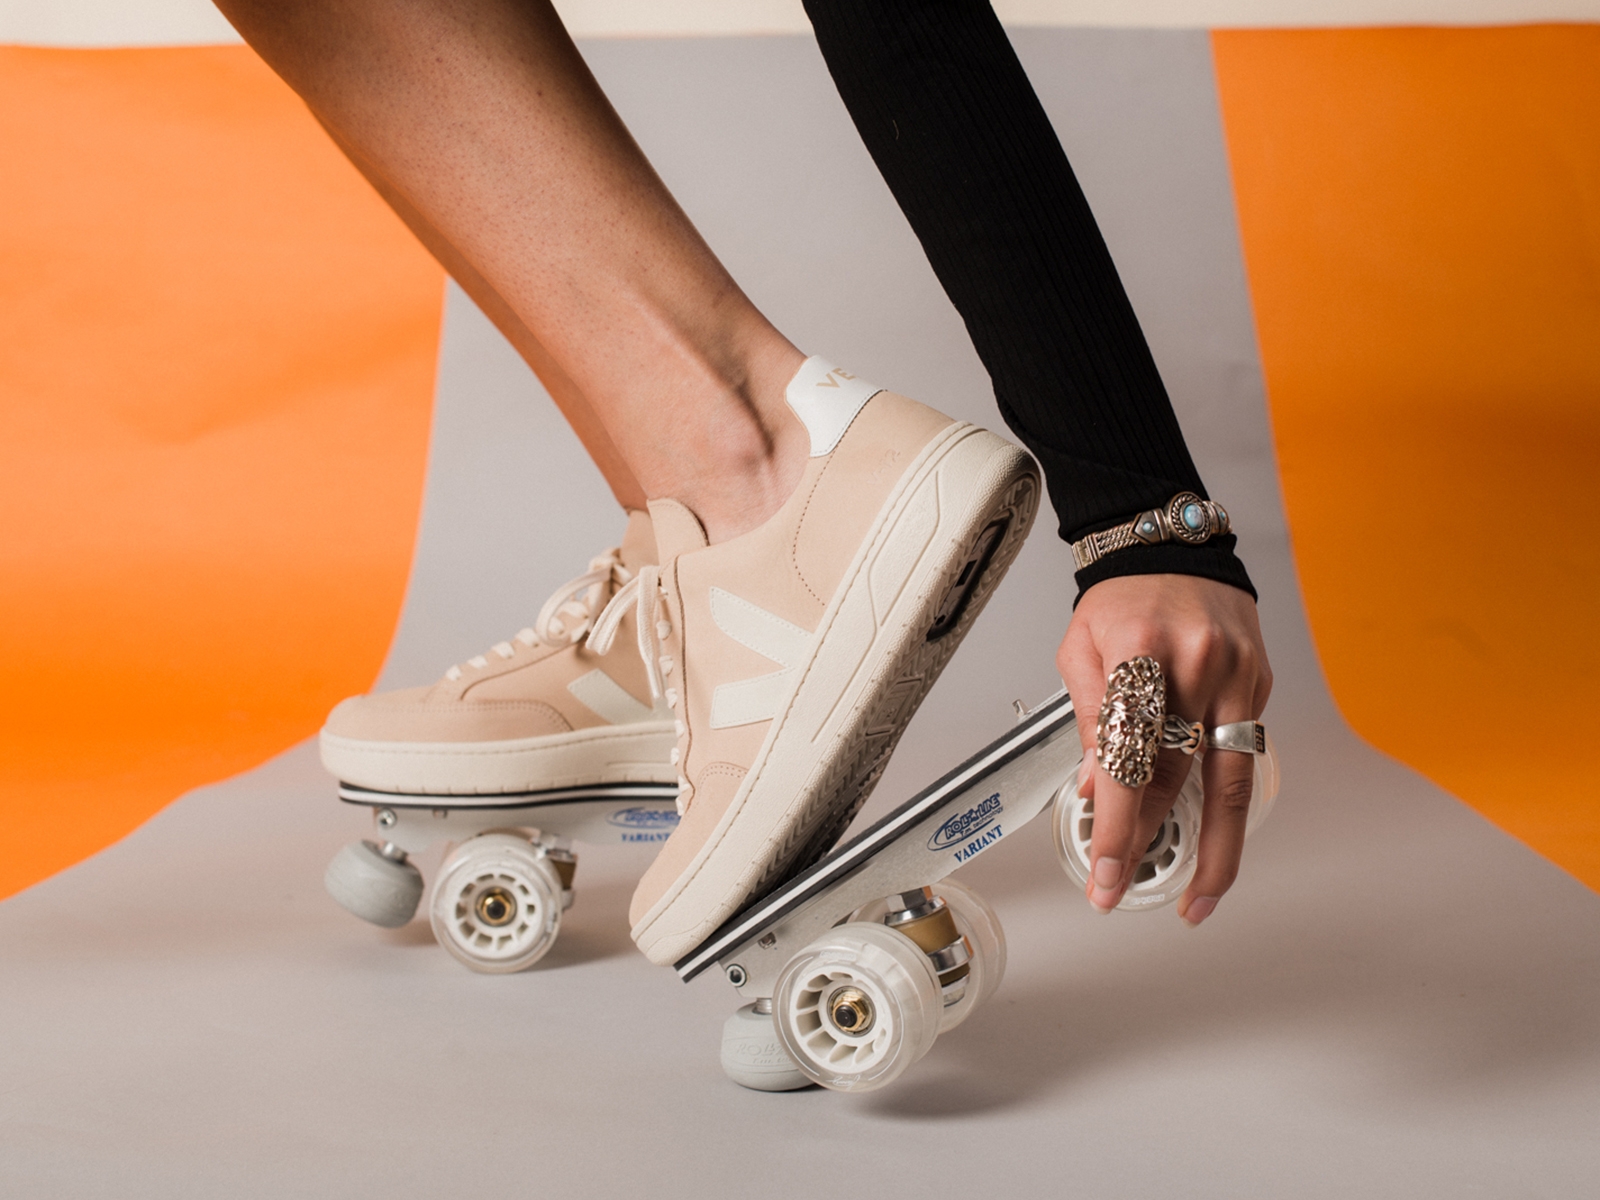 converse roller skate shoes